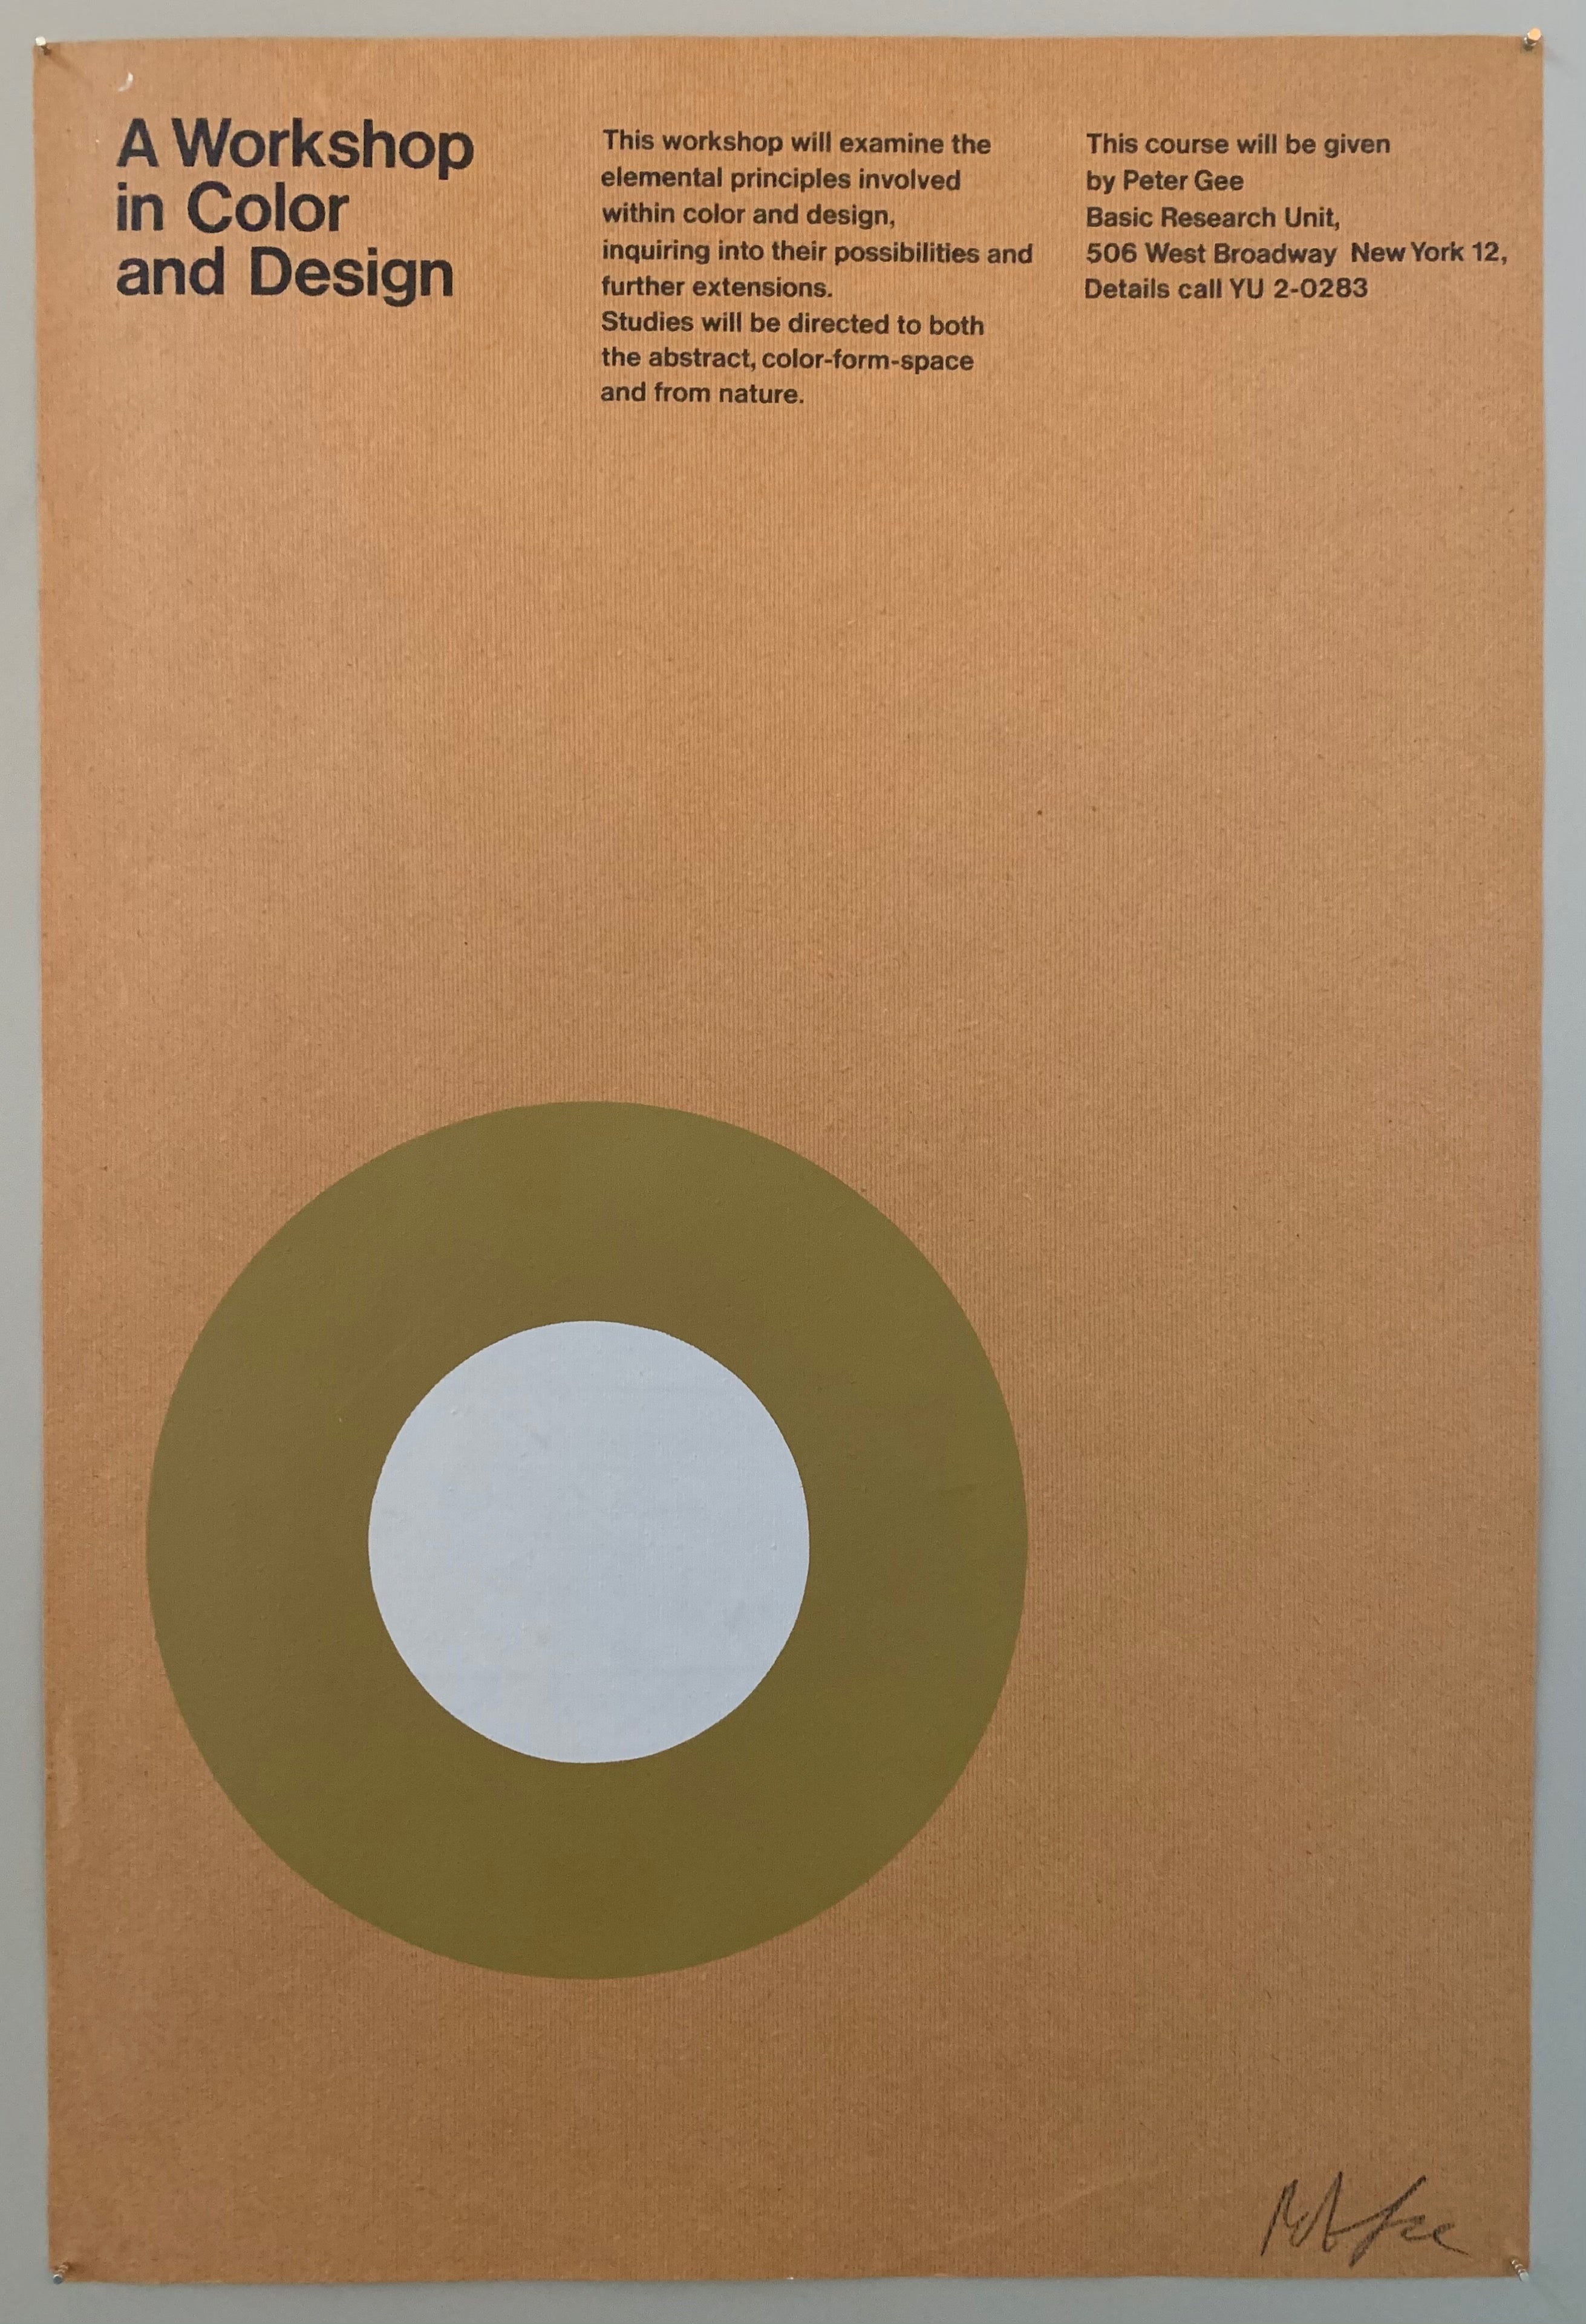 Poster for a design workshop featuring a green and blue target against a brown background 